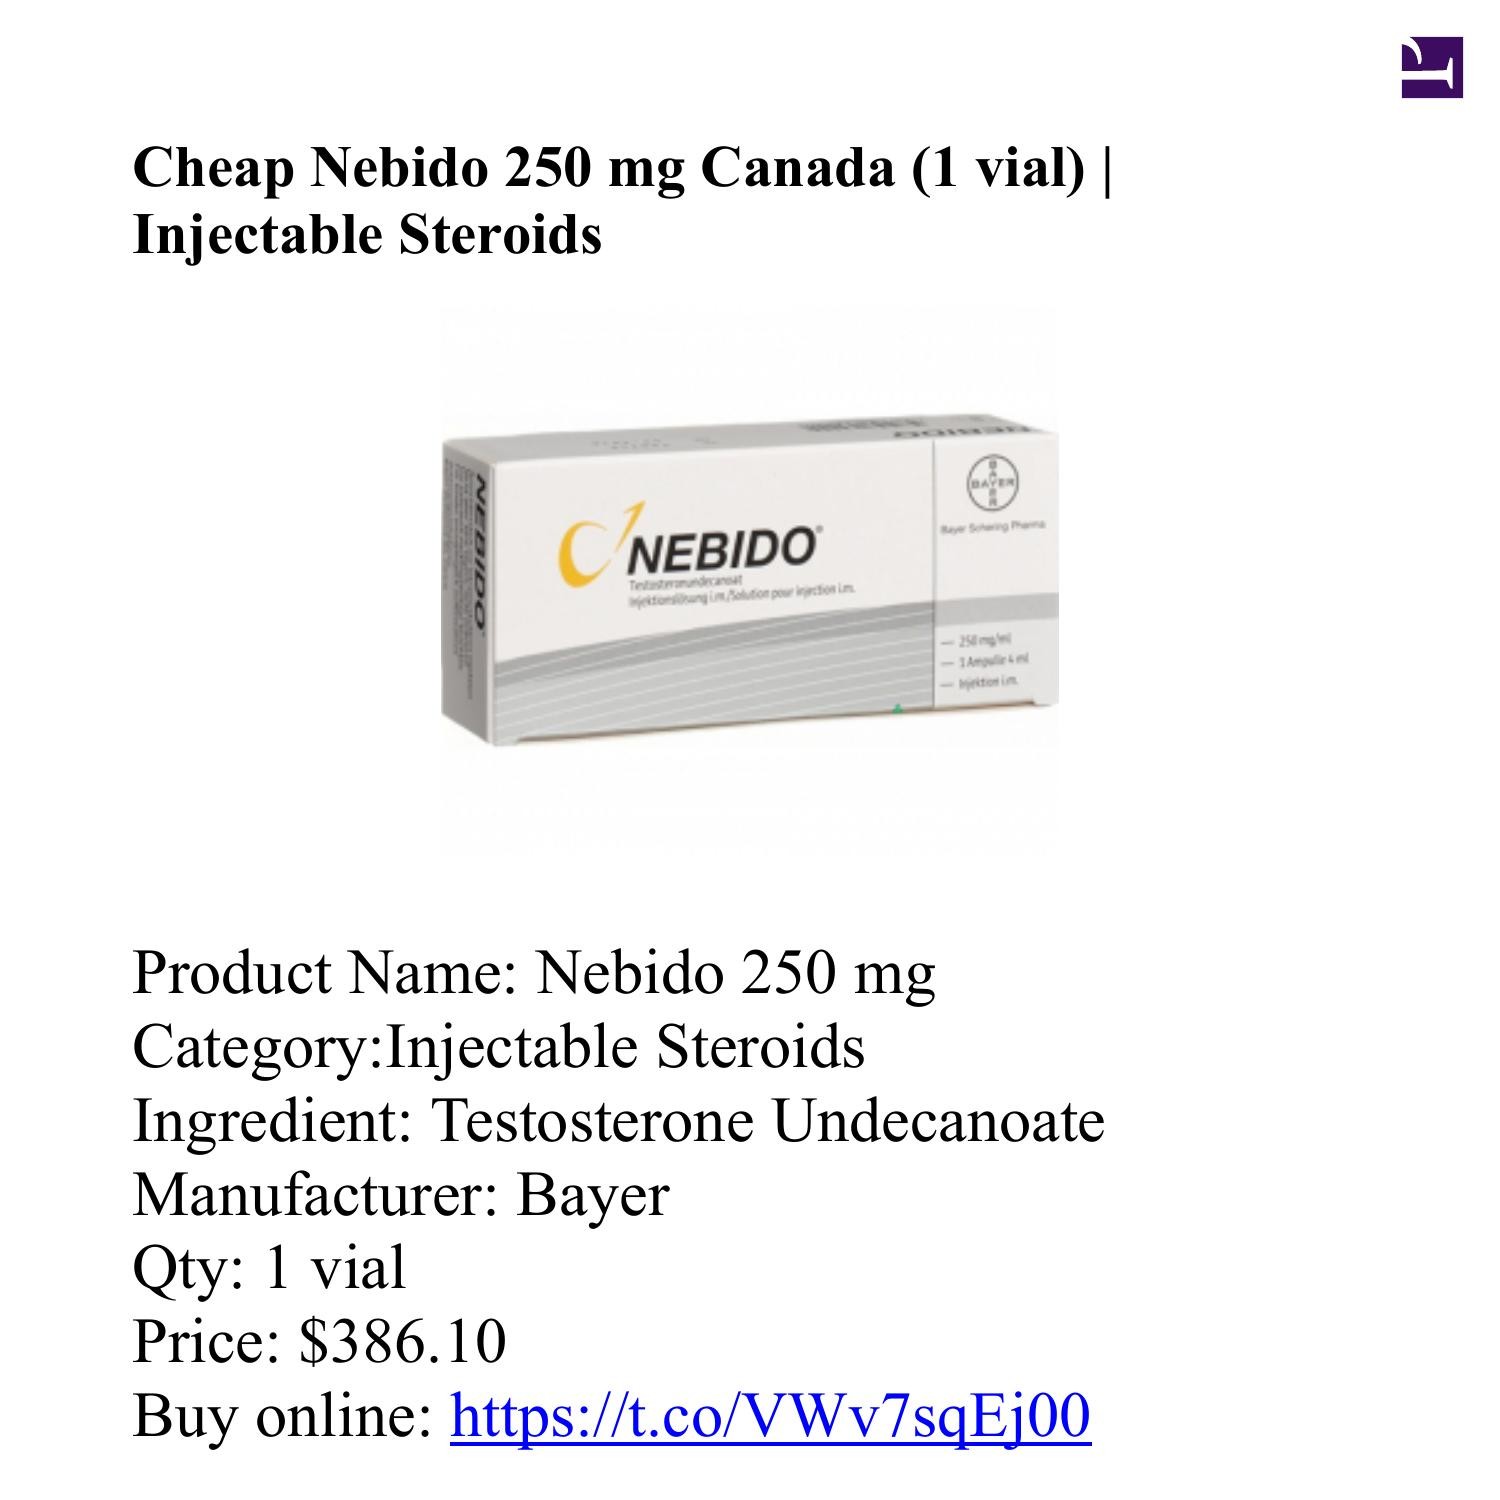 Now You Can Have Your super steroide?trackid=sp-007 Done Safely